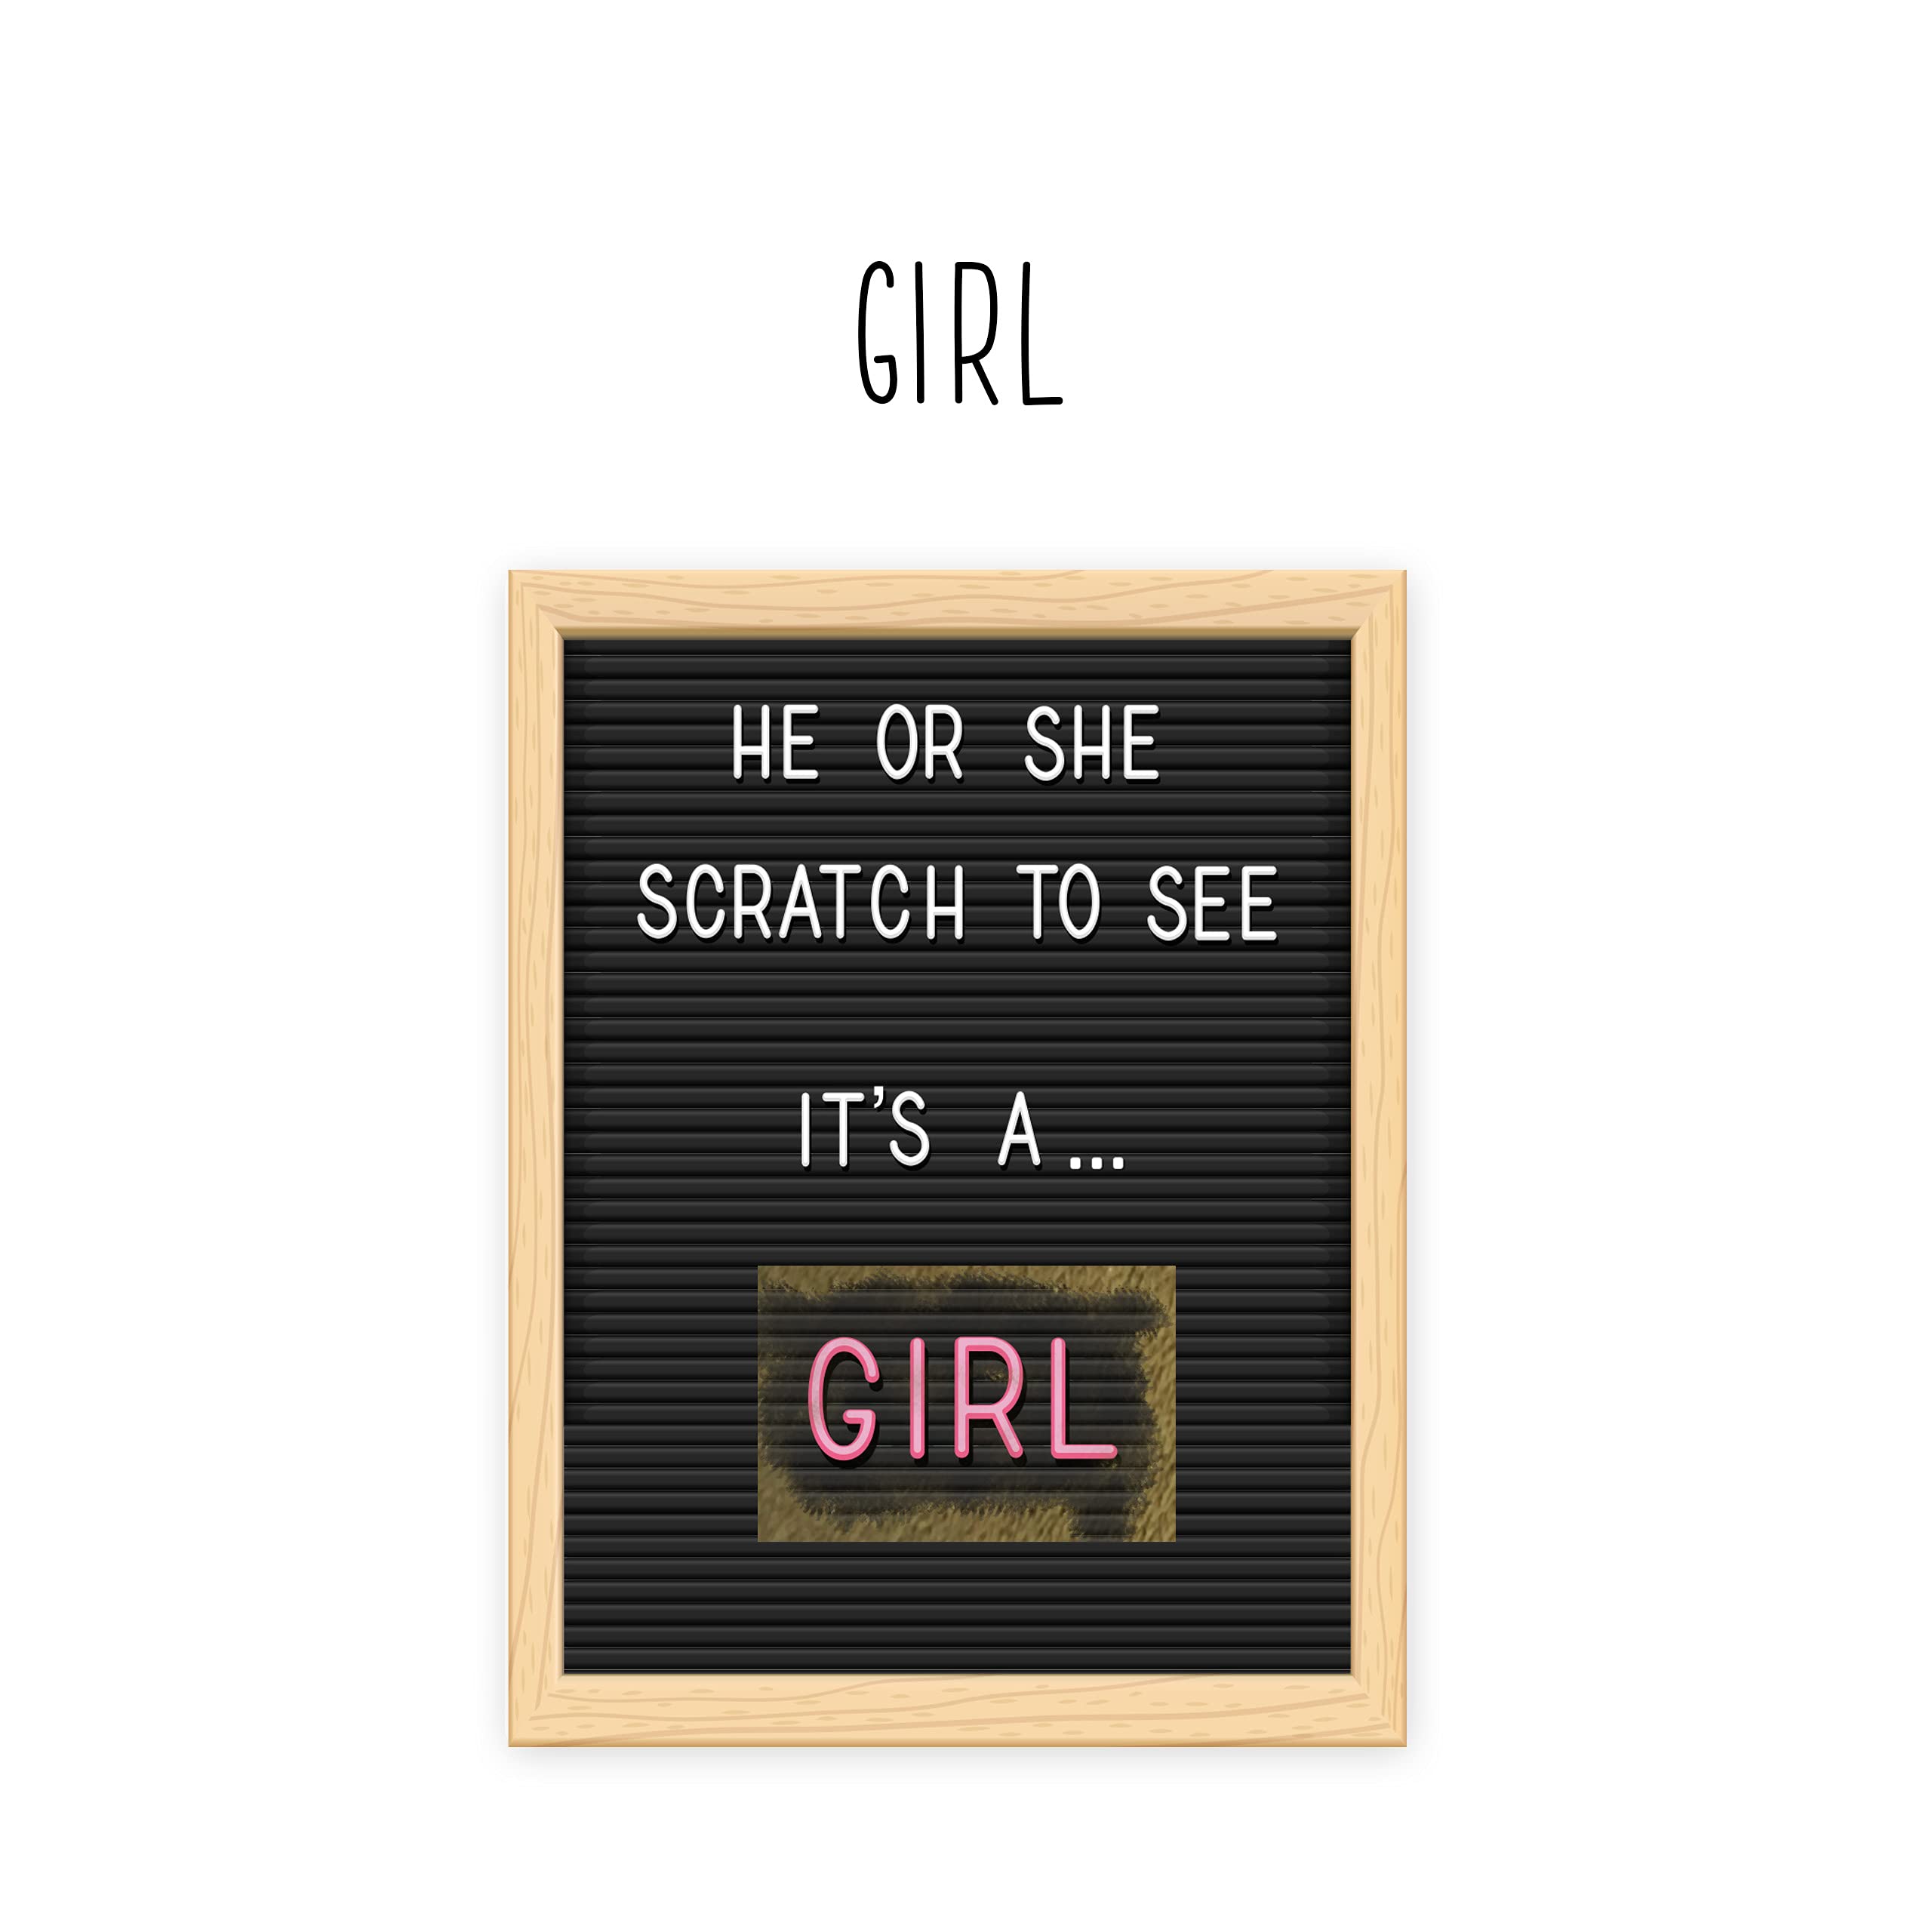 My Scratch Offs Its a Girl Letter Board Gender Reveal Scratch Off Scratcher Lottery Tickets Cards Family Friends 25 pack